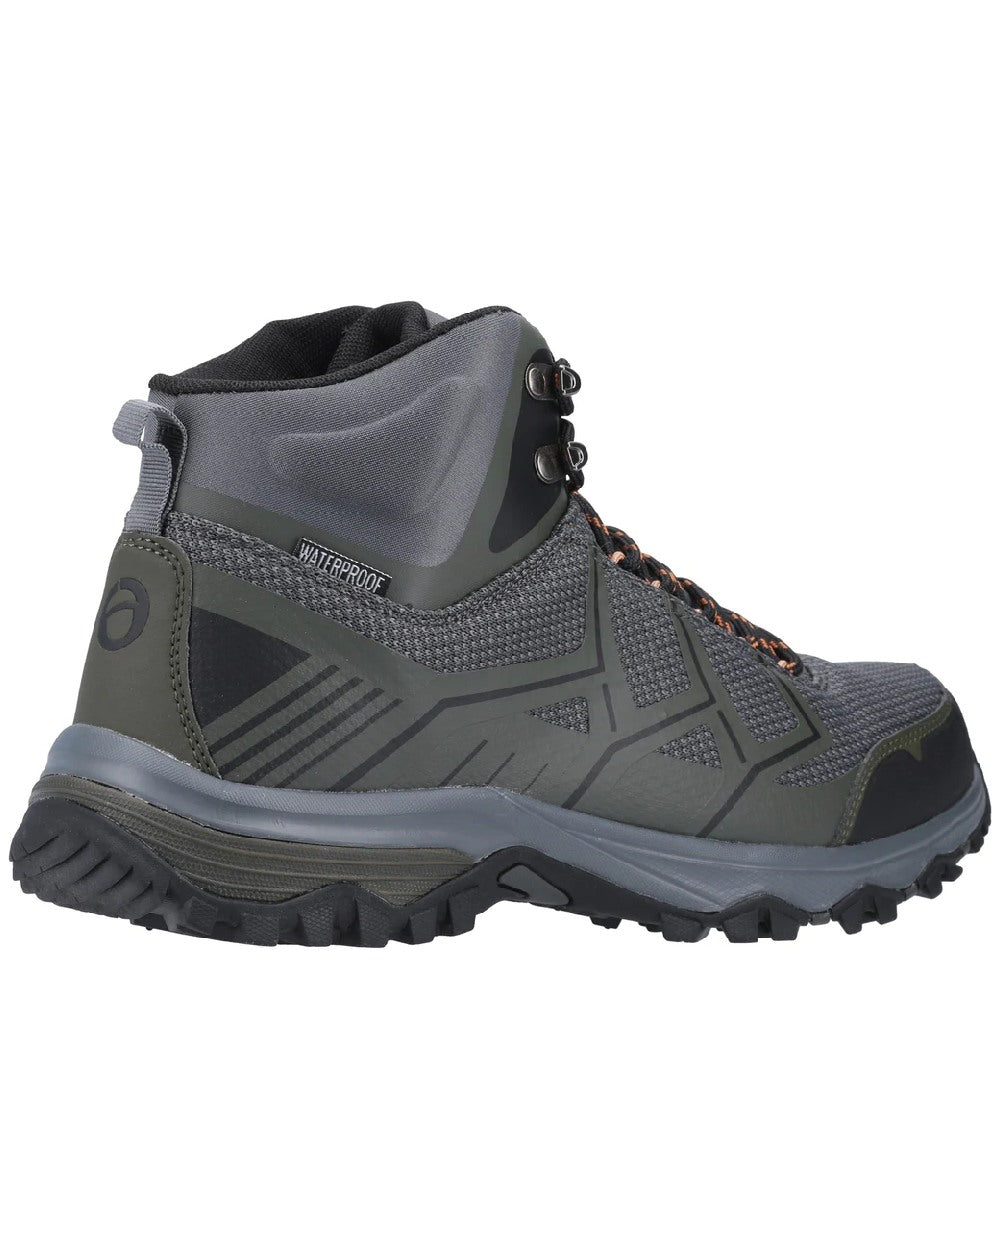 Cotswold Mens Wychwood Recycled Hiking Boots in Olive Grey 